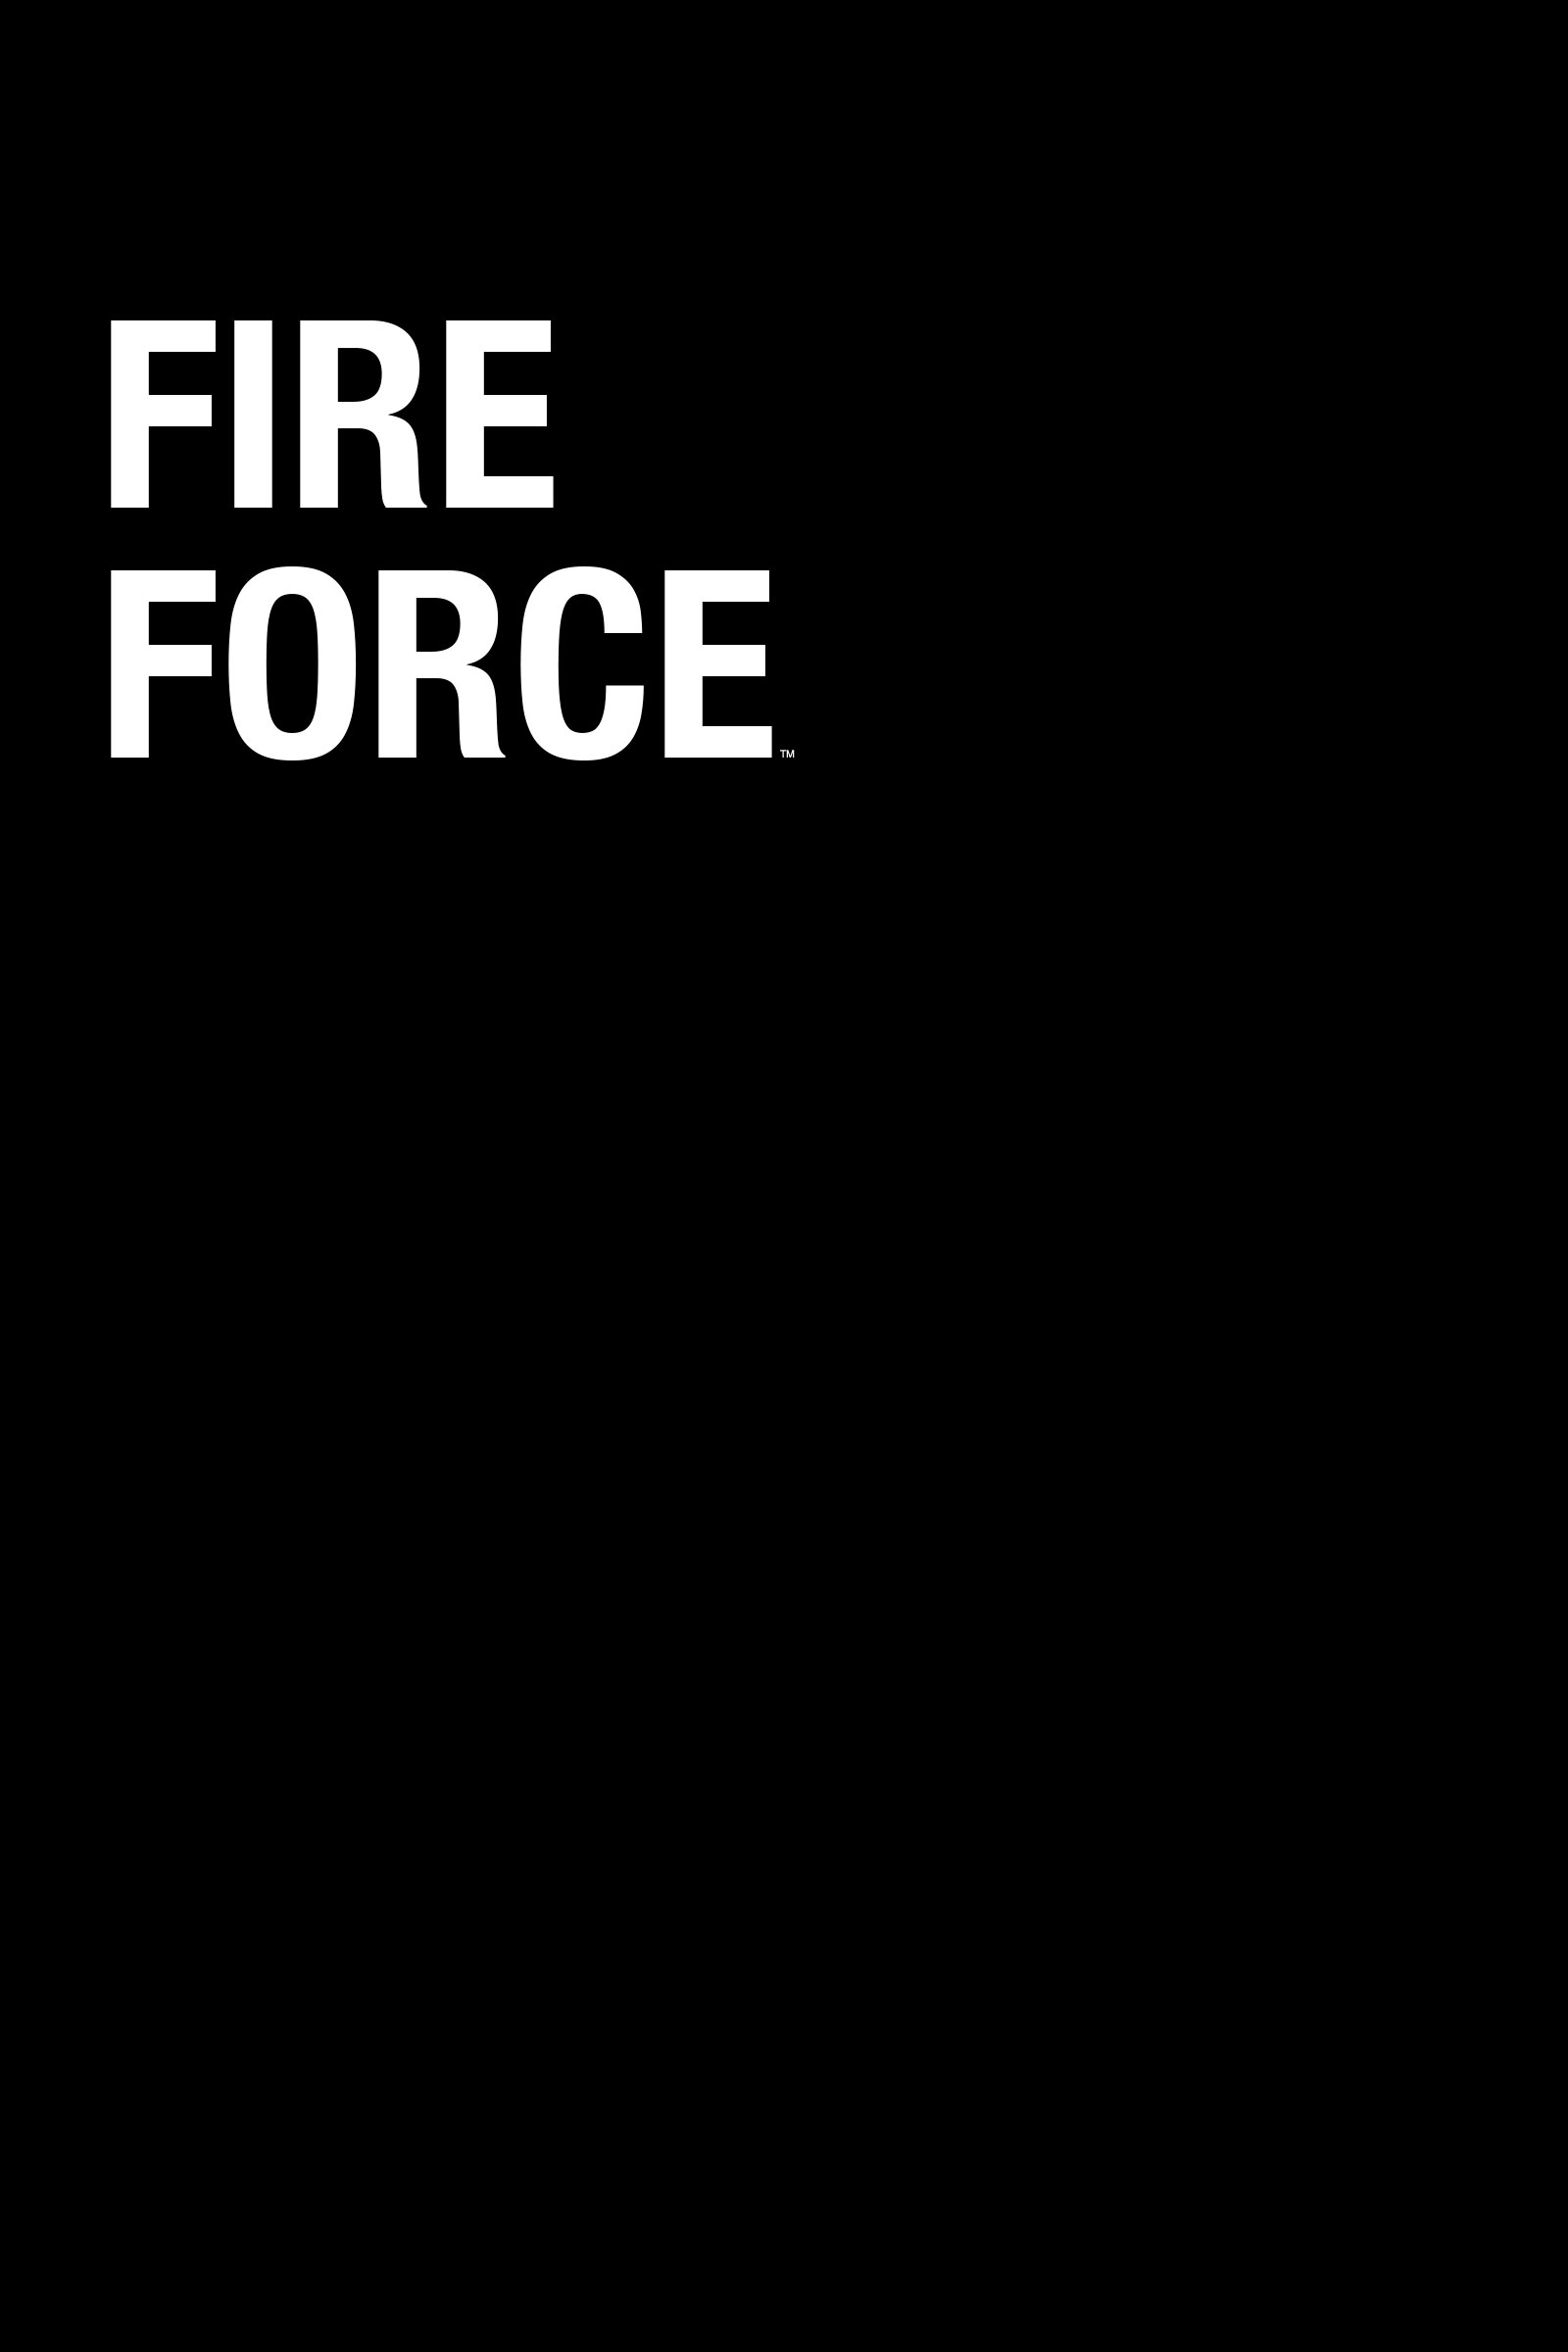 Fire Force Season 1: Where To Watch Every Episode